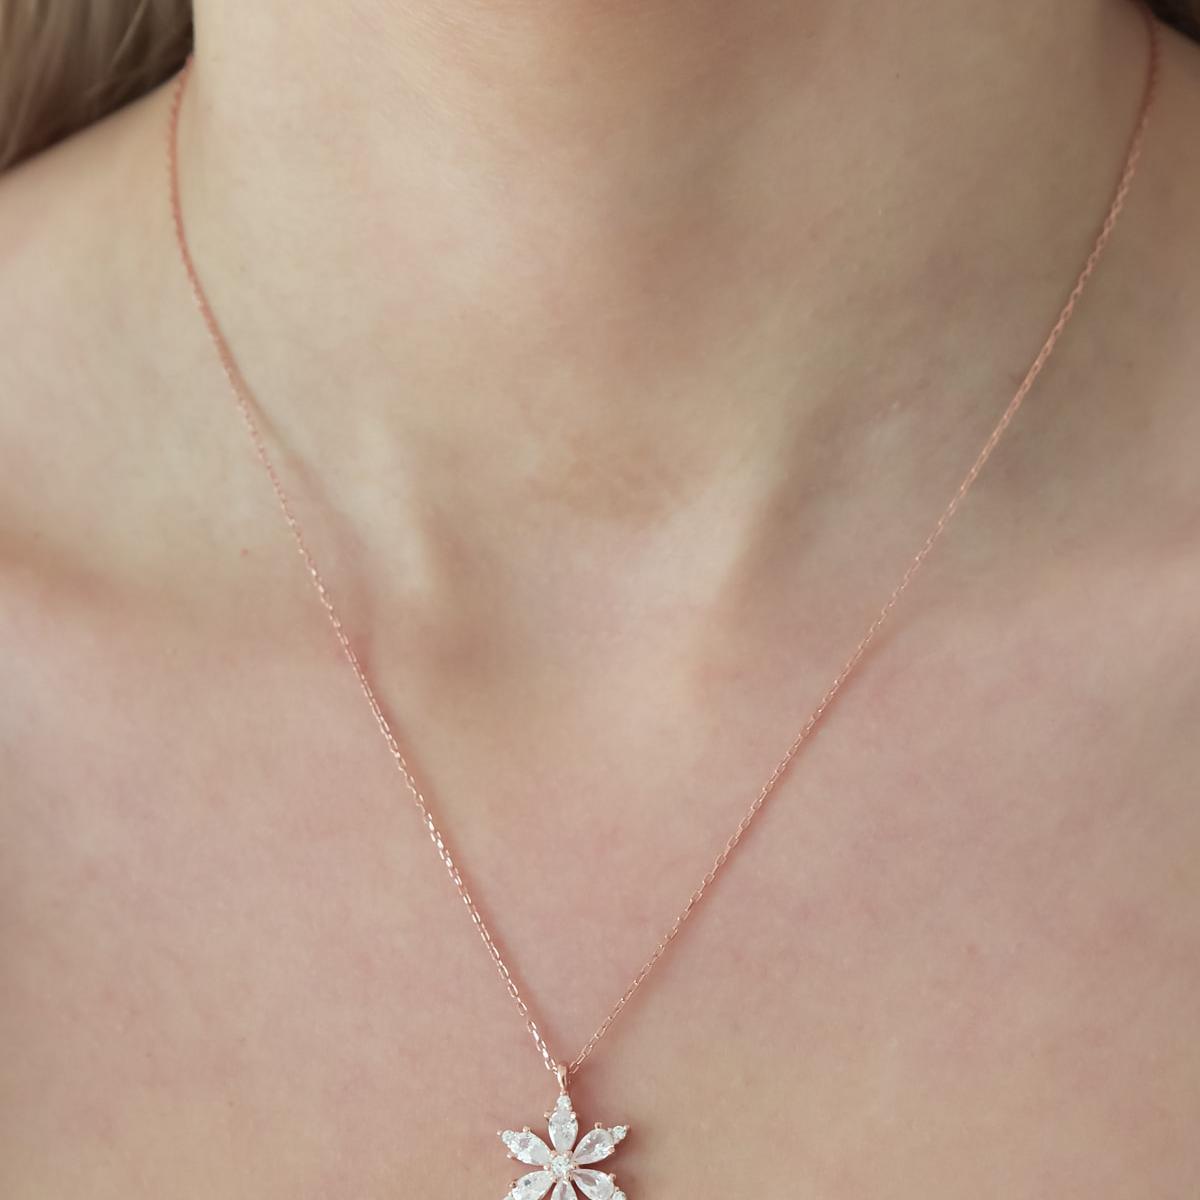 White Lotus Flower Necklace • Lotus Diamond Necklace • Yoga Gift - Trending Silver Gifts